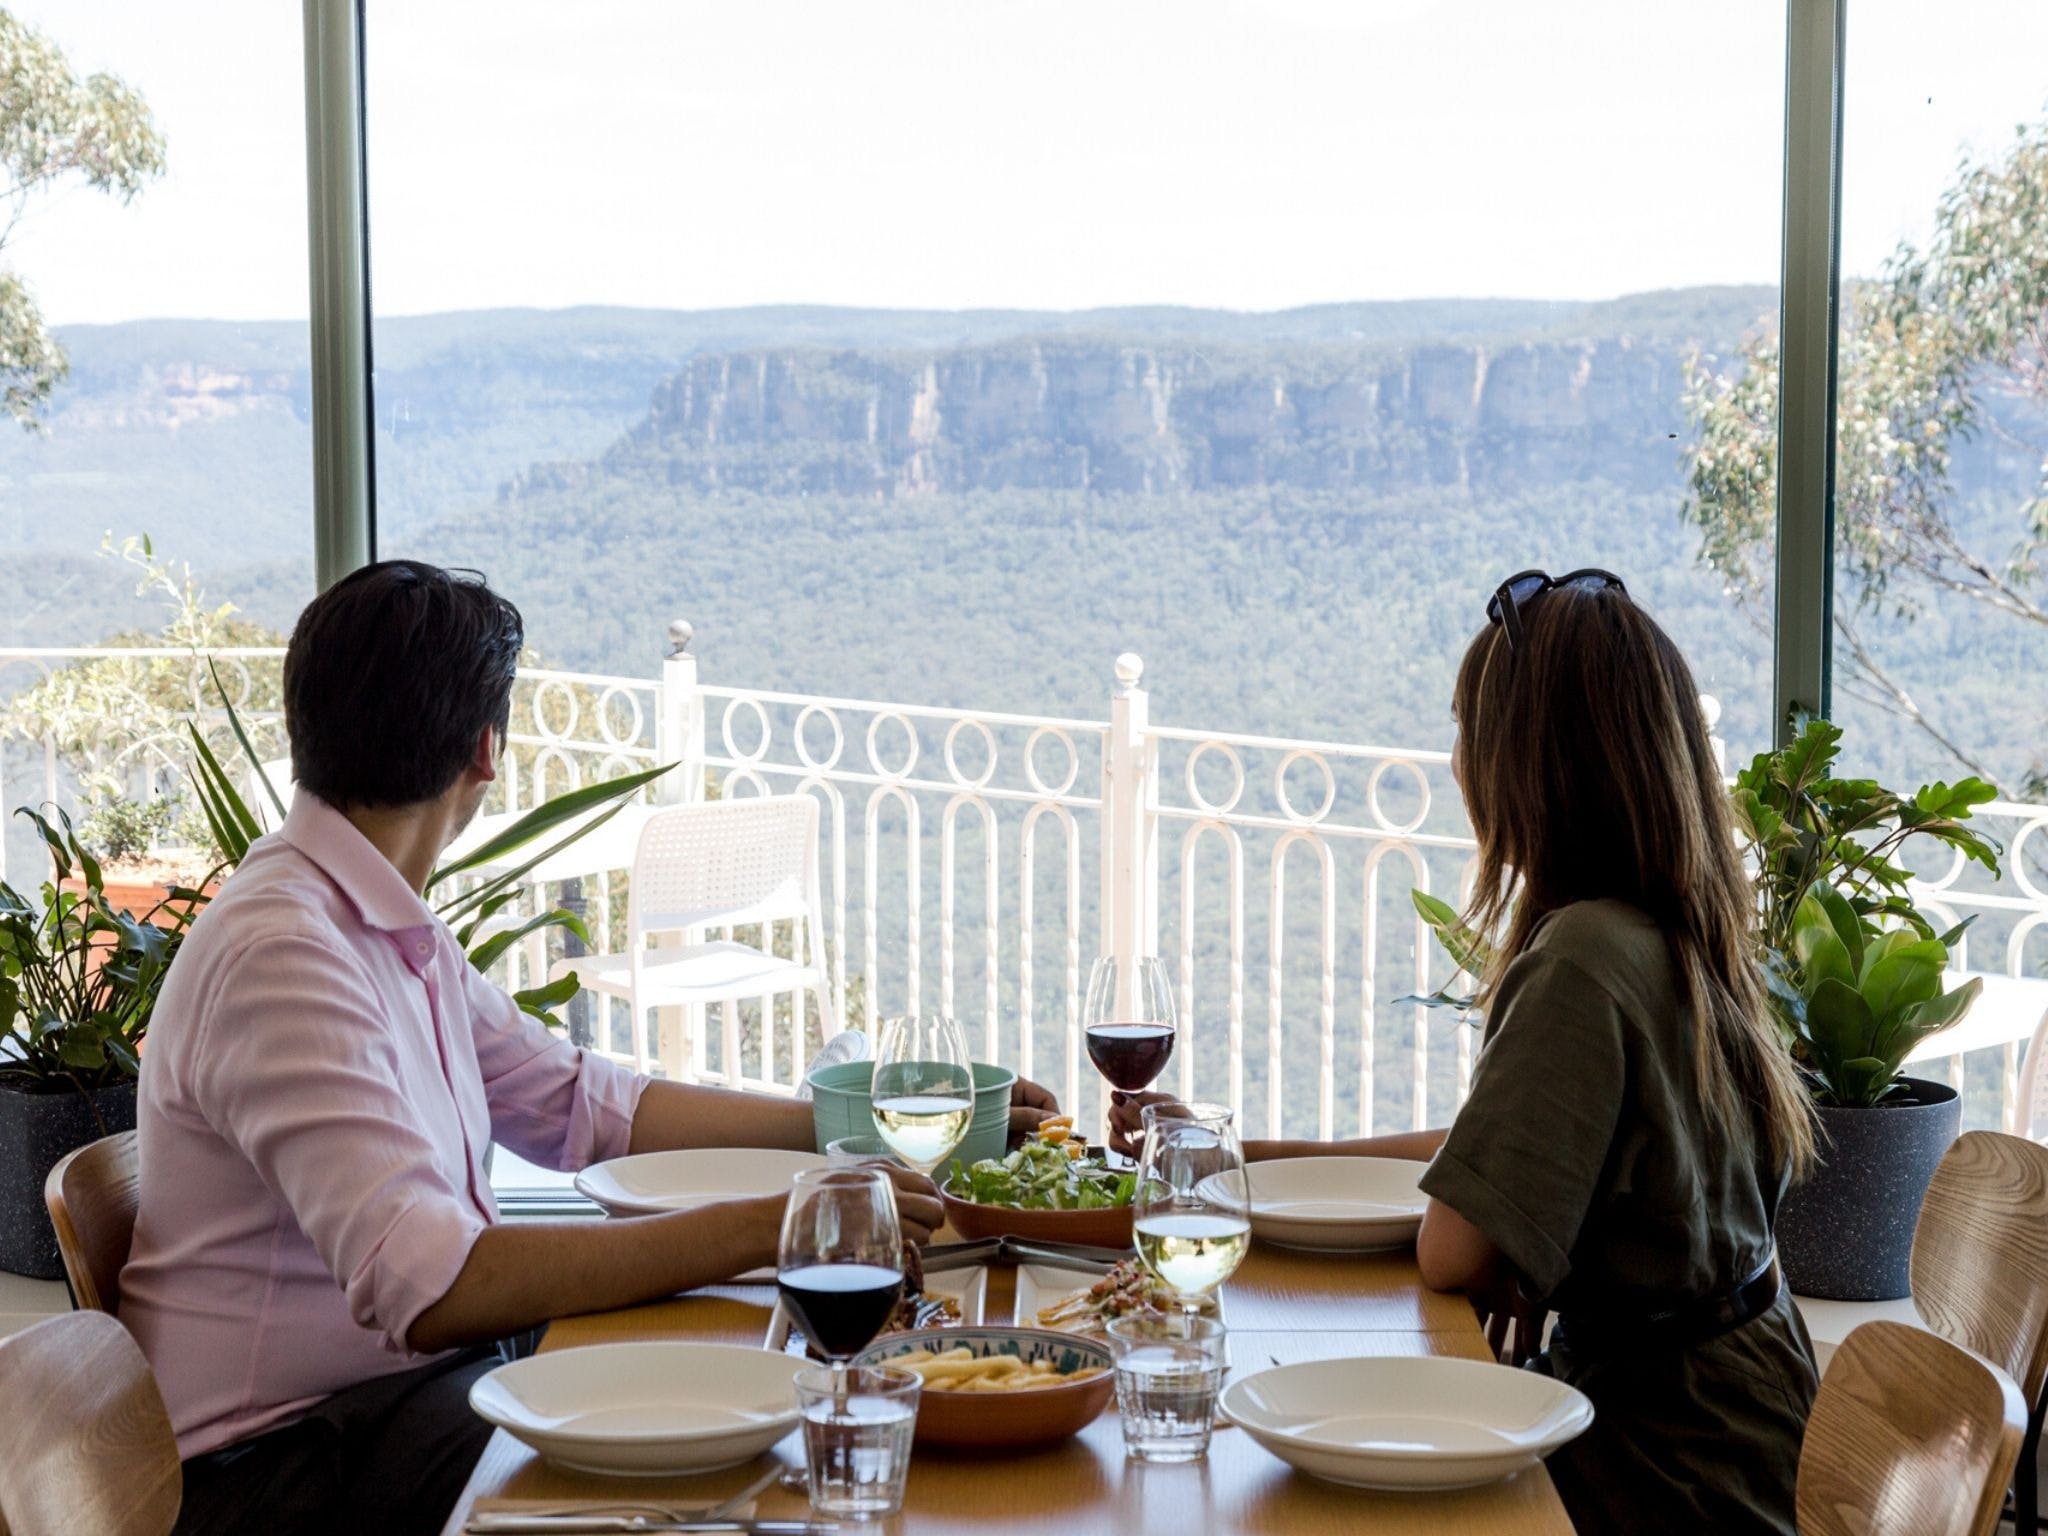 Christmas Day Lunch at The Lookout Echo Point - Kingaroy Accommodation